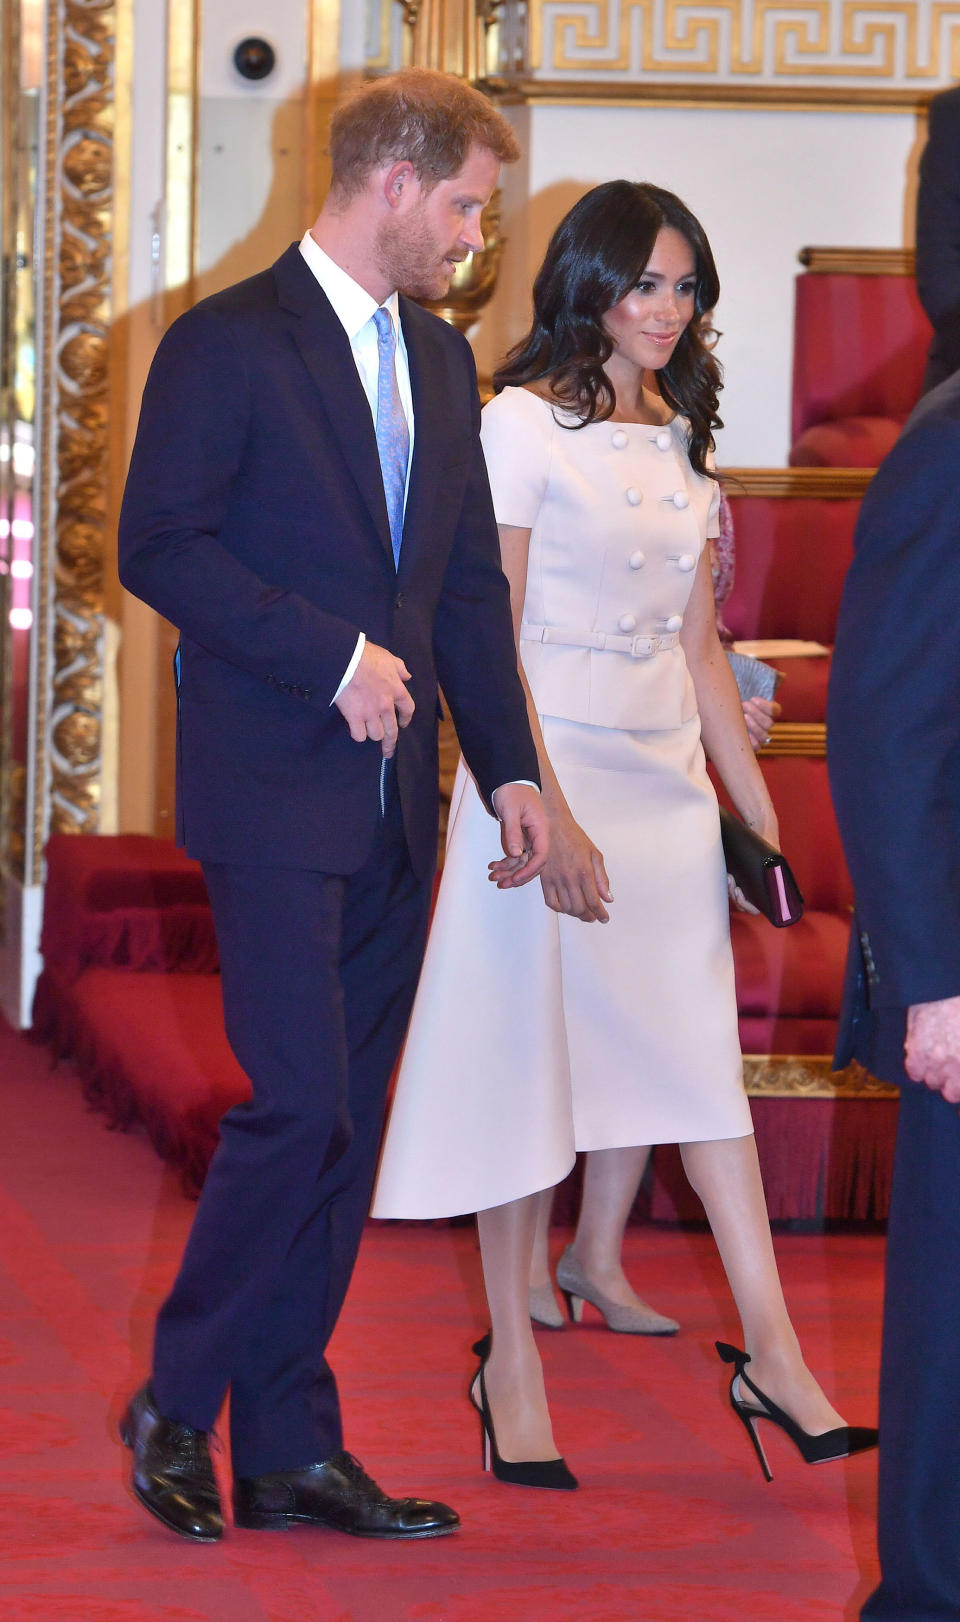 For the Queen’s Young Leaders ceremony at Buckingham Palace on 27 June, Meghan opted for a powder pink skirt suit by Prada [Photo: PA]